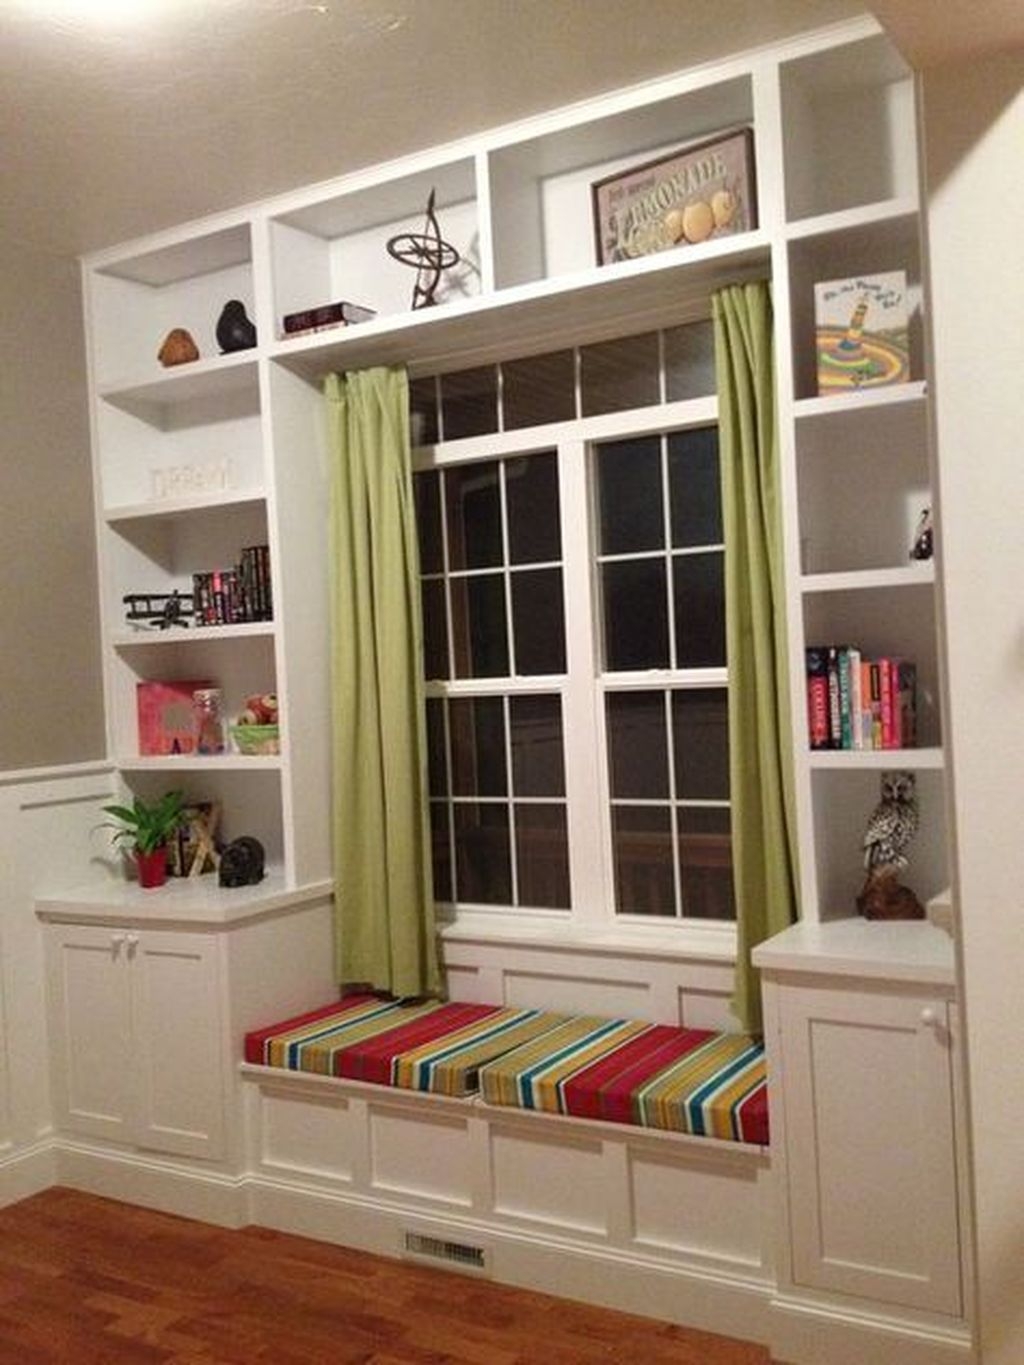 Comfy Window Seat Ideas For A Cozy Home 31